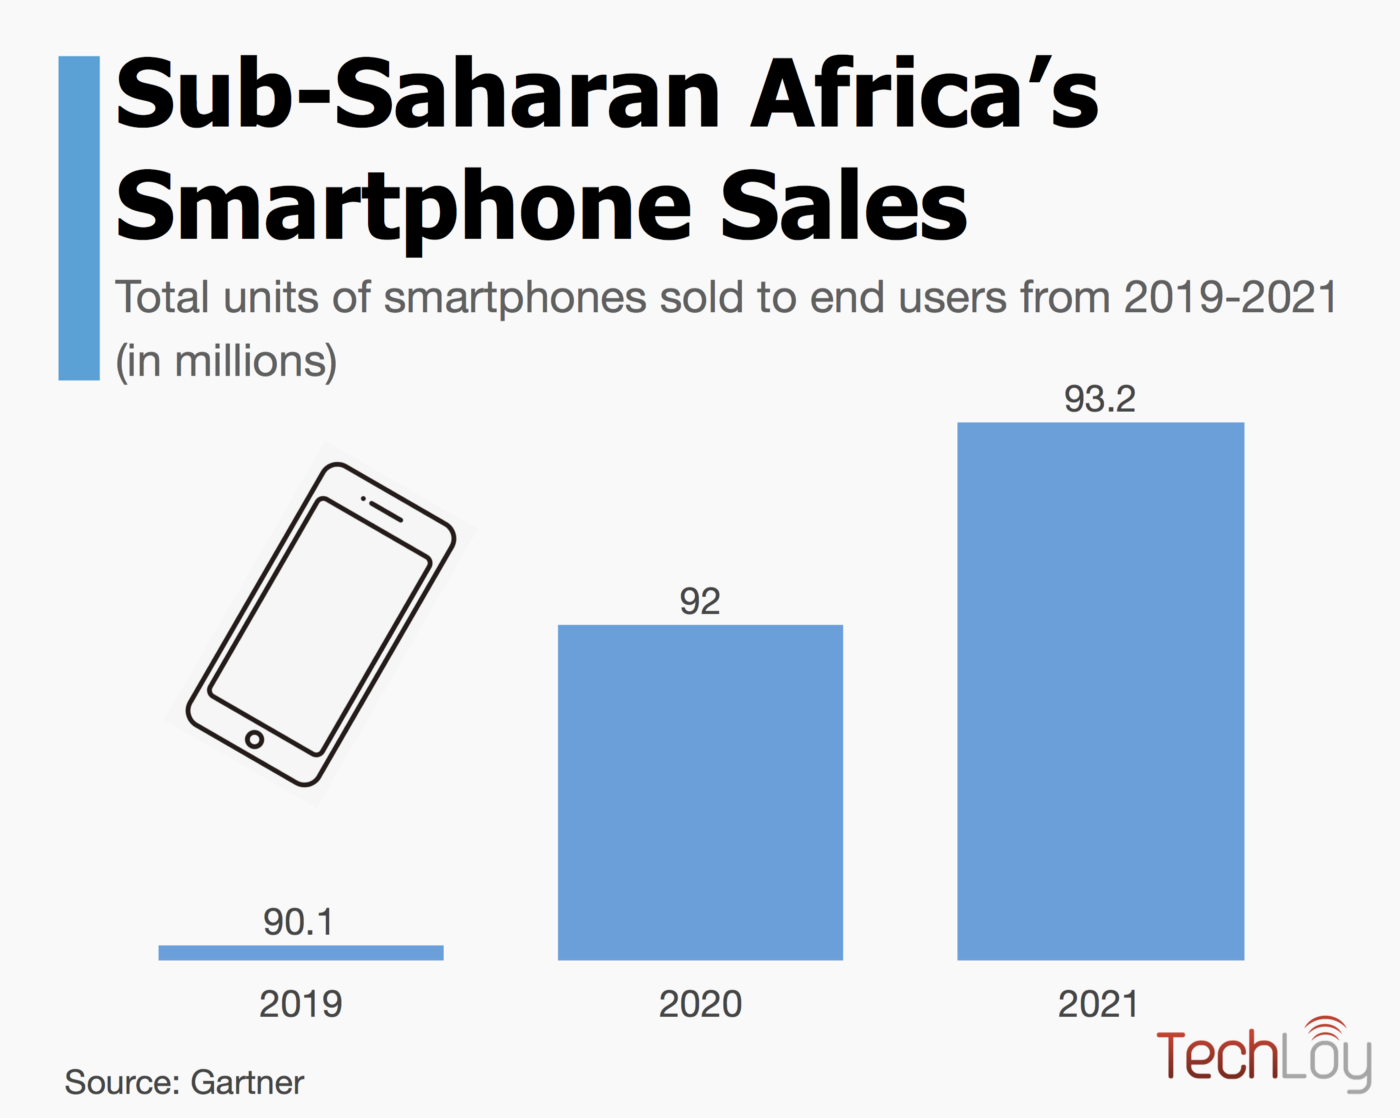 Africa’s smartphone sales to reach 92 million units by year-end 2020